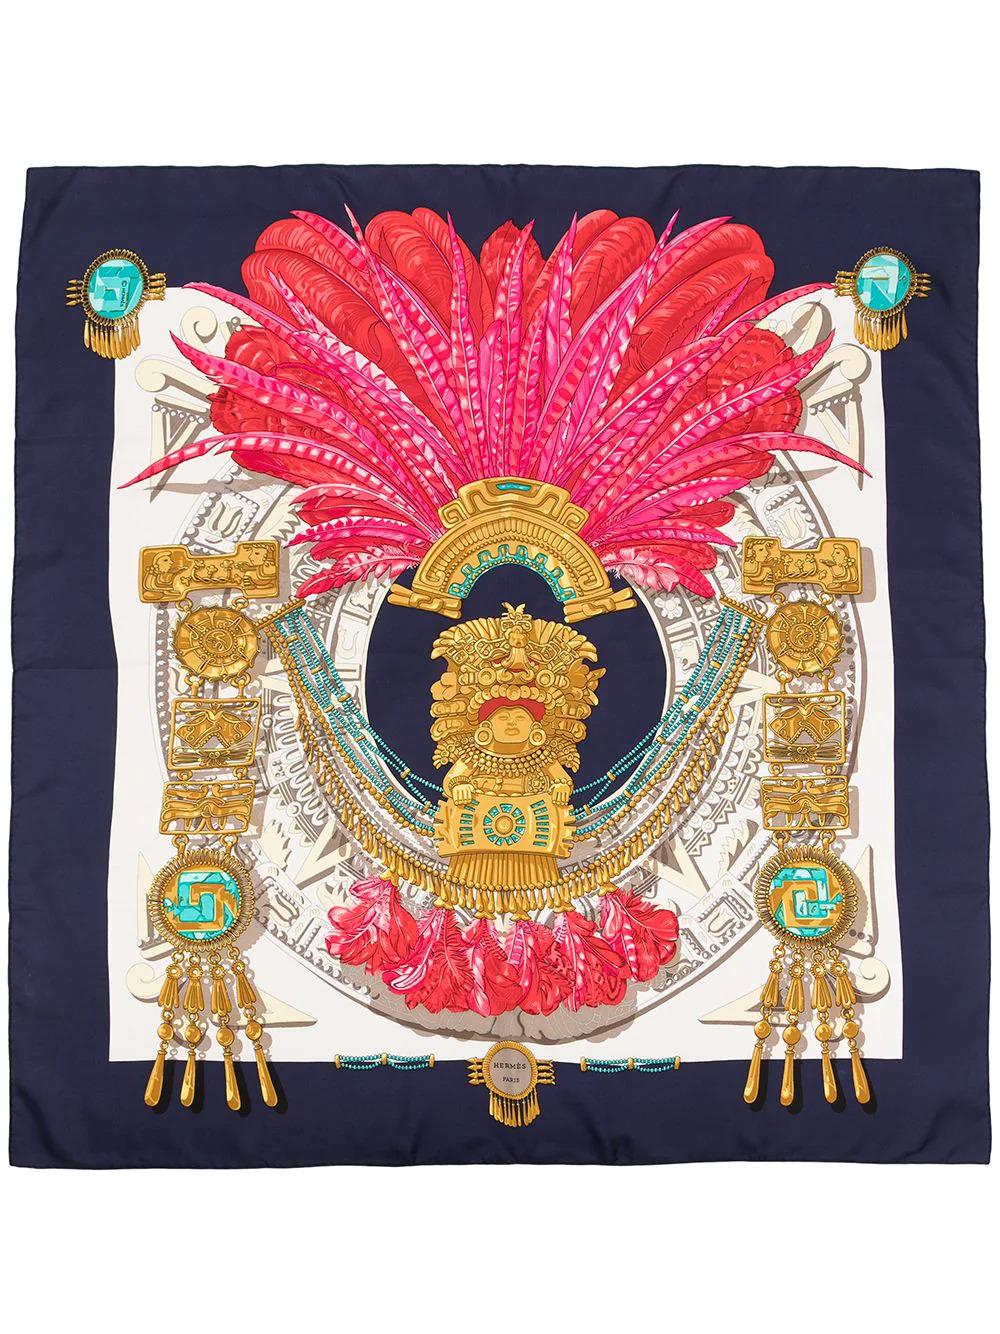 Crafted in France from the finest silk, this pre-owned scarf by Hermès features lightweight construction, a square shape, and a myriad of Egyptian feathers, designed in the 1980s. This versatile piece would look great with any outfit but can also be